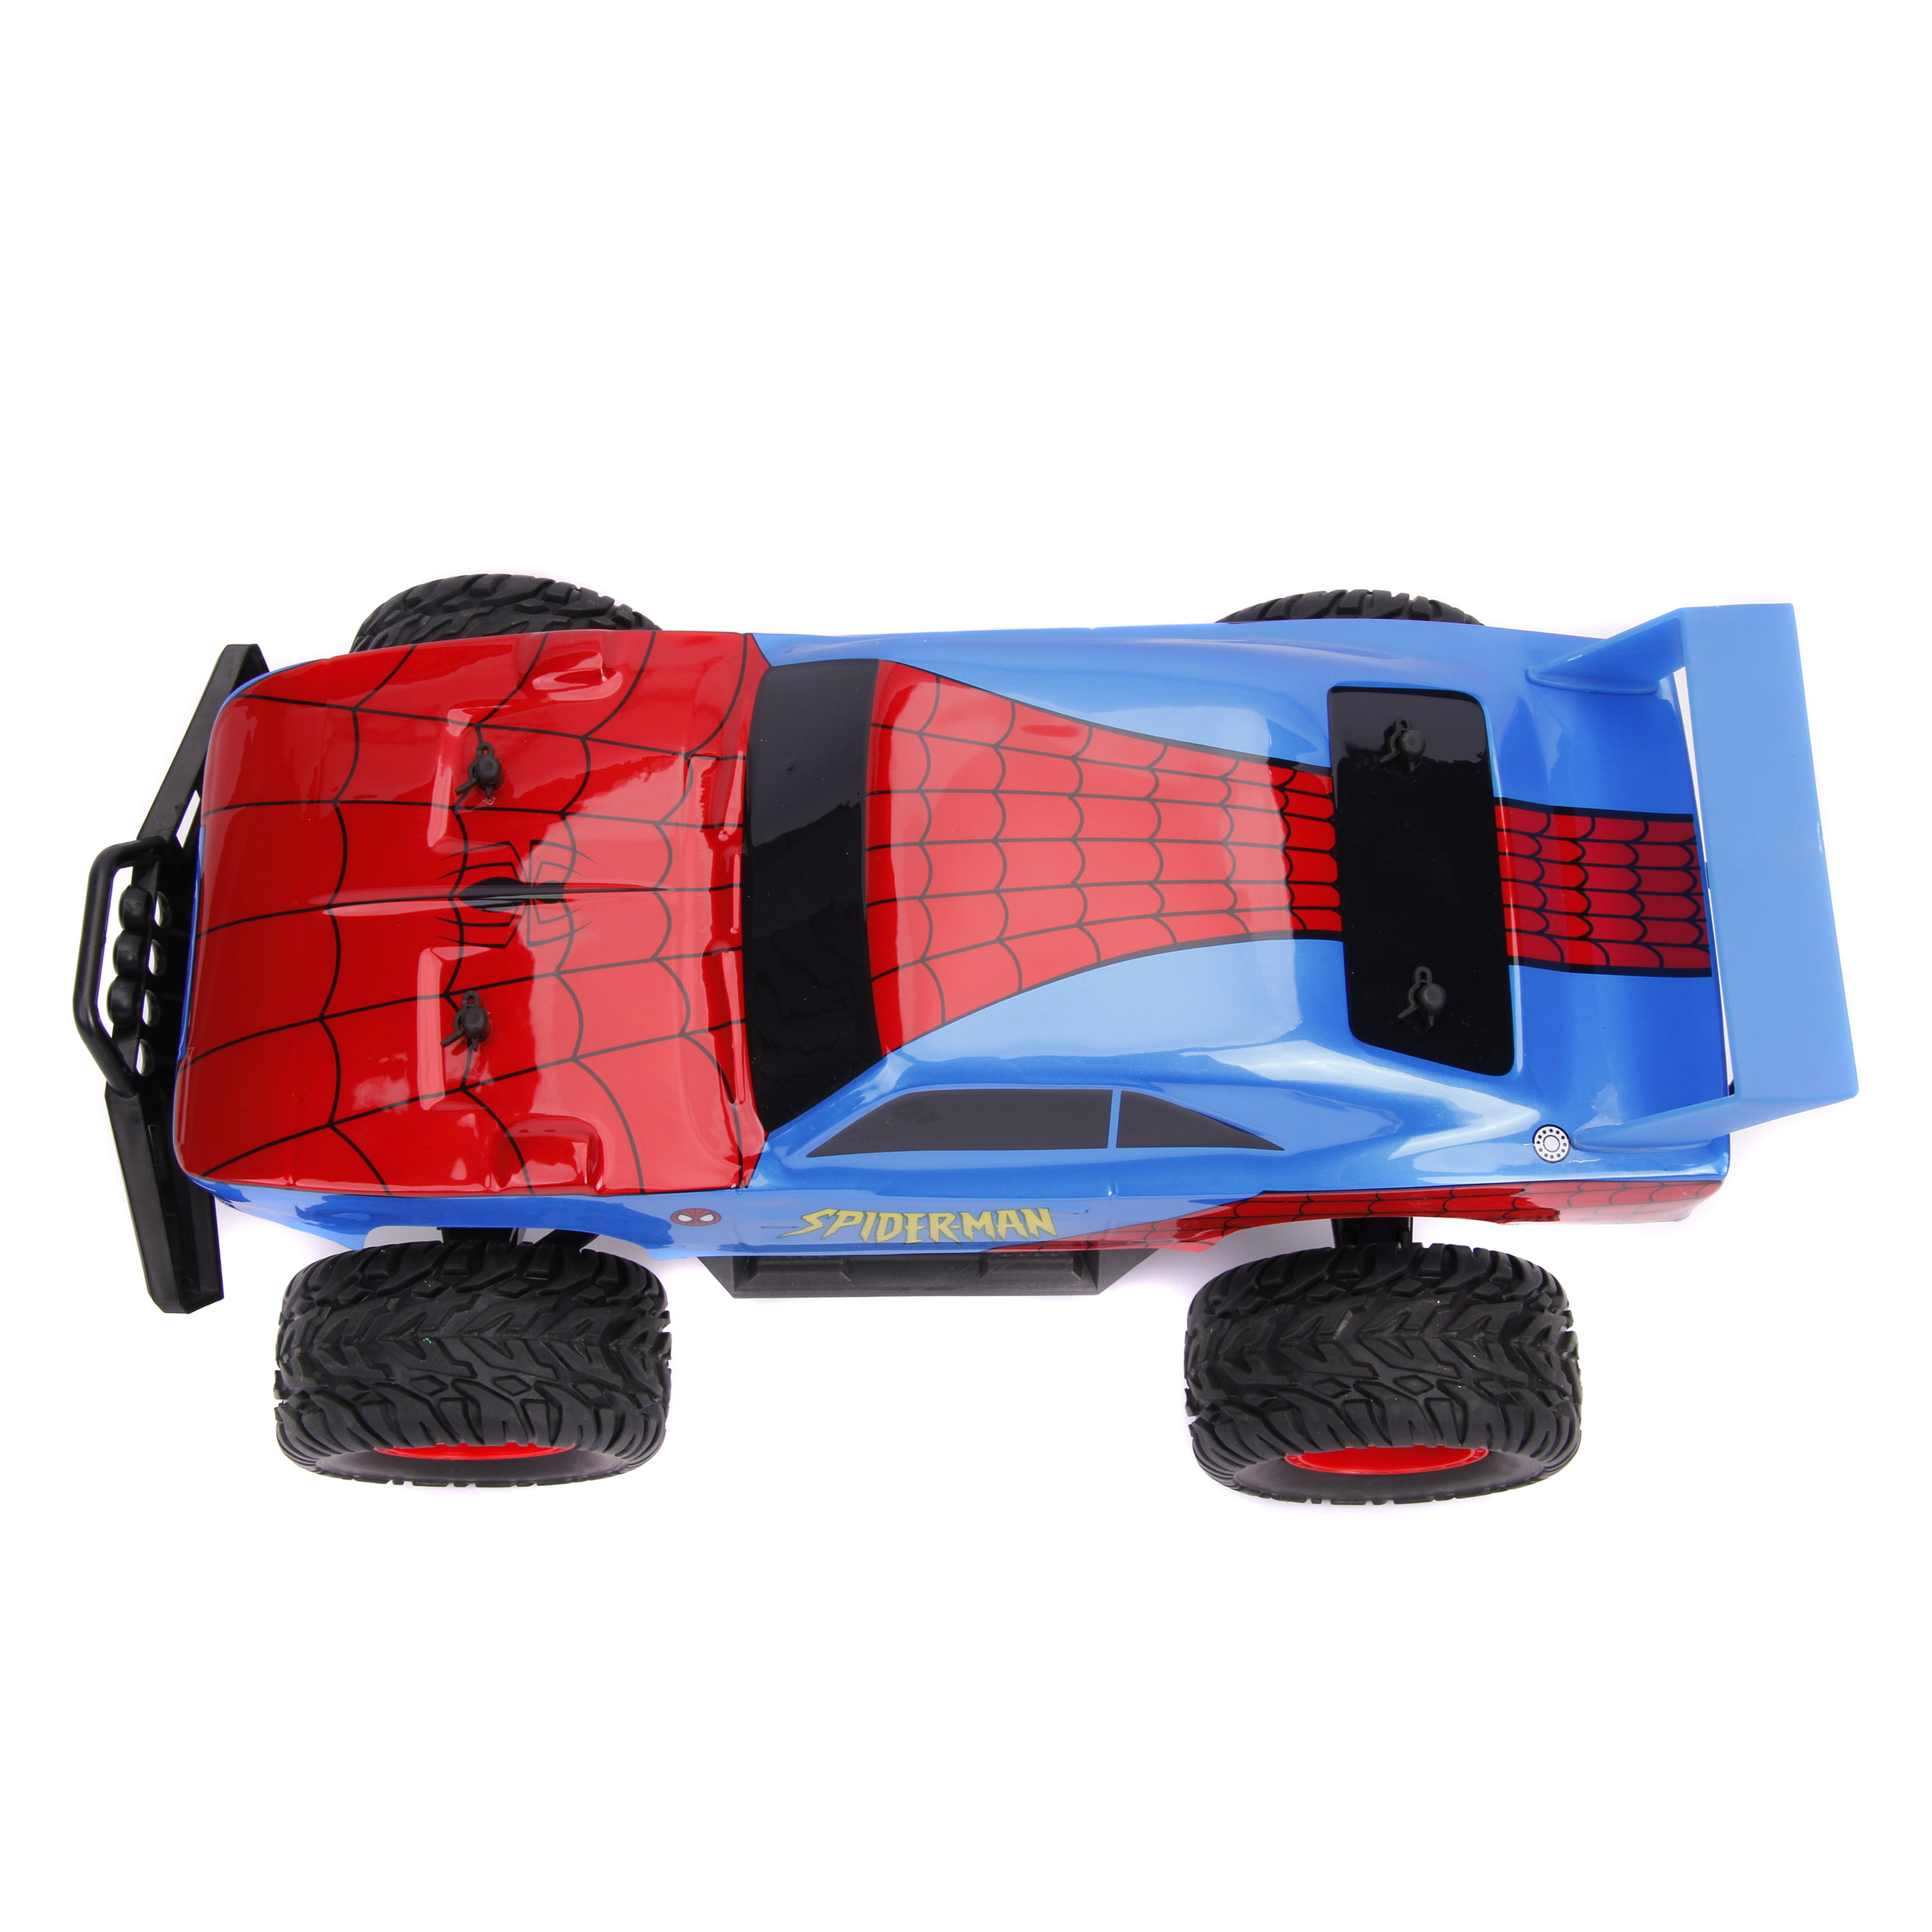 Spiderman RC Car NEW & Boxed 